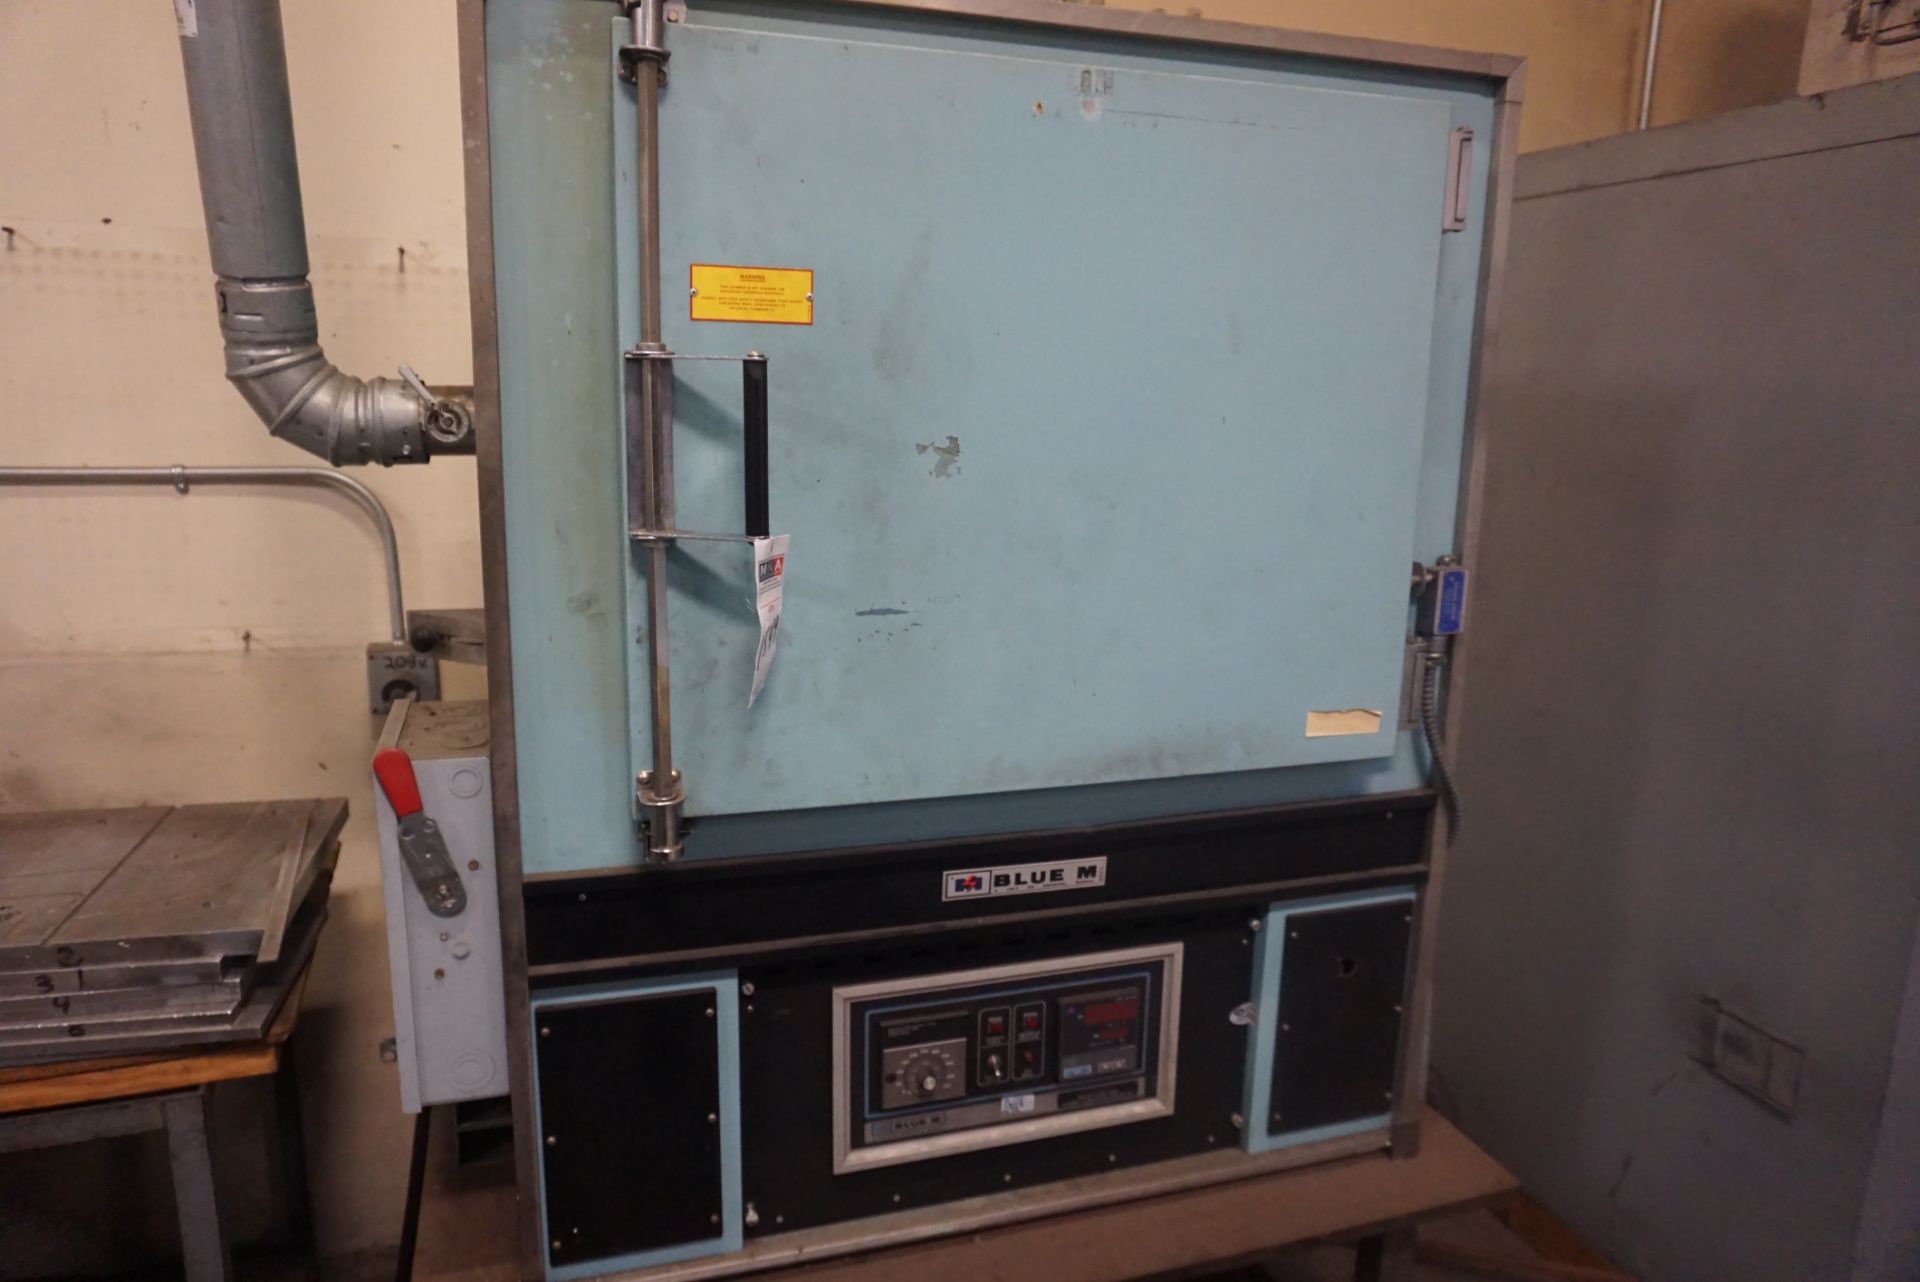 Blue M DC256C 650 Degree Max. Temp. Convection Oven, s/n DC3476